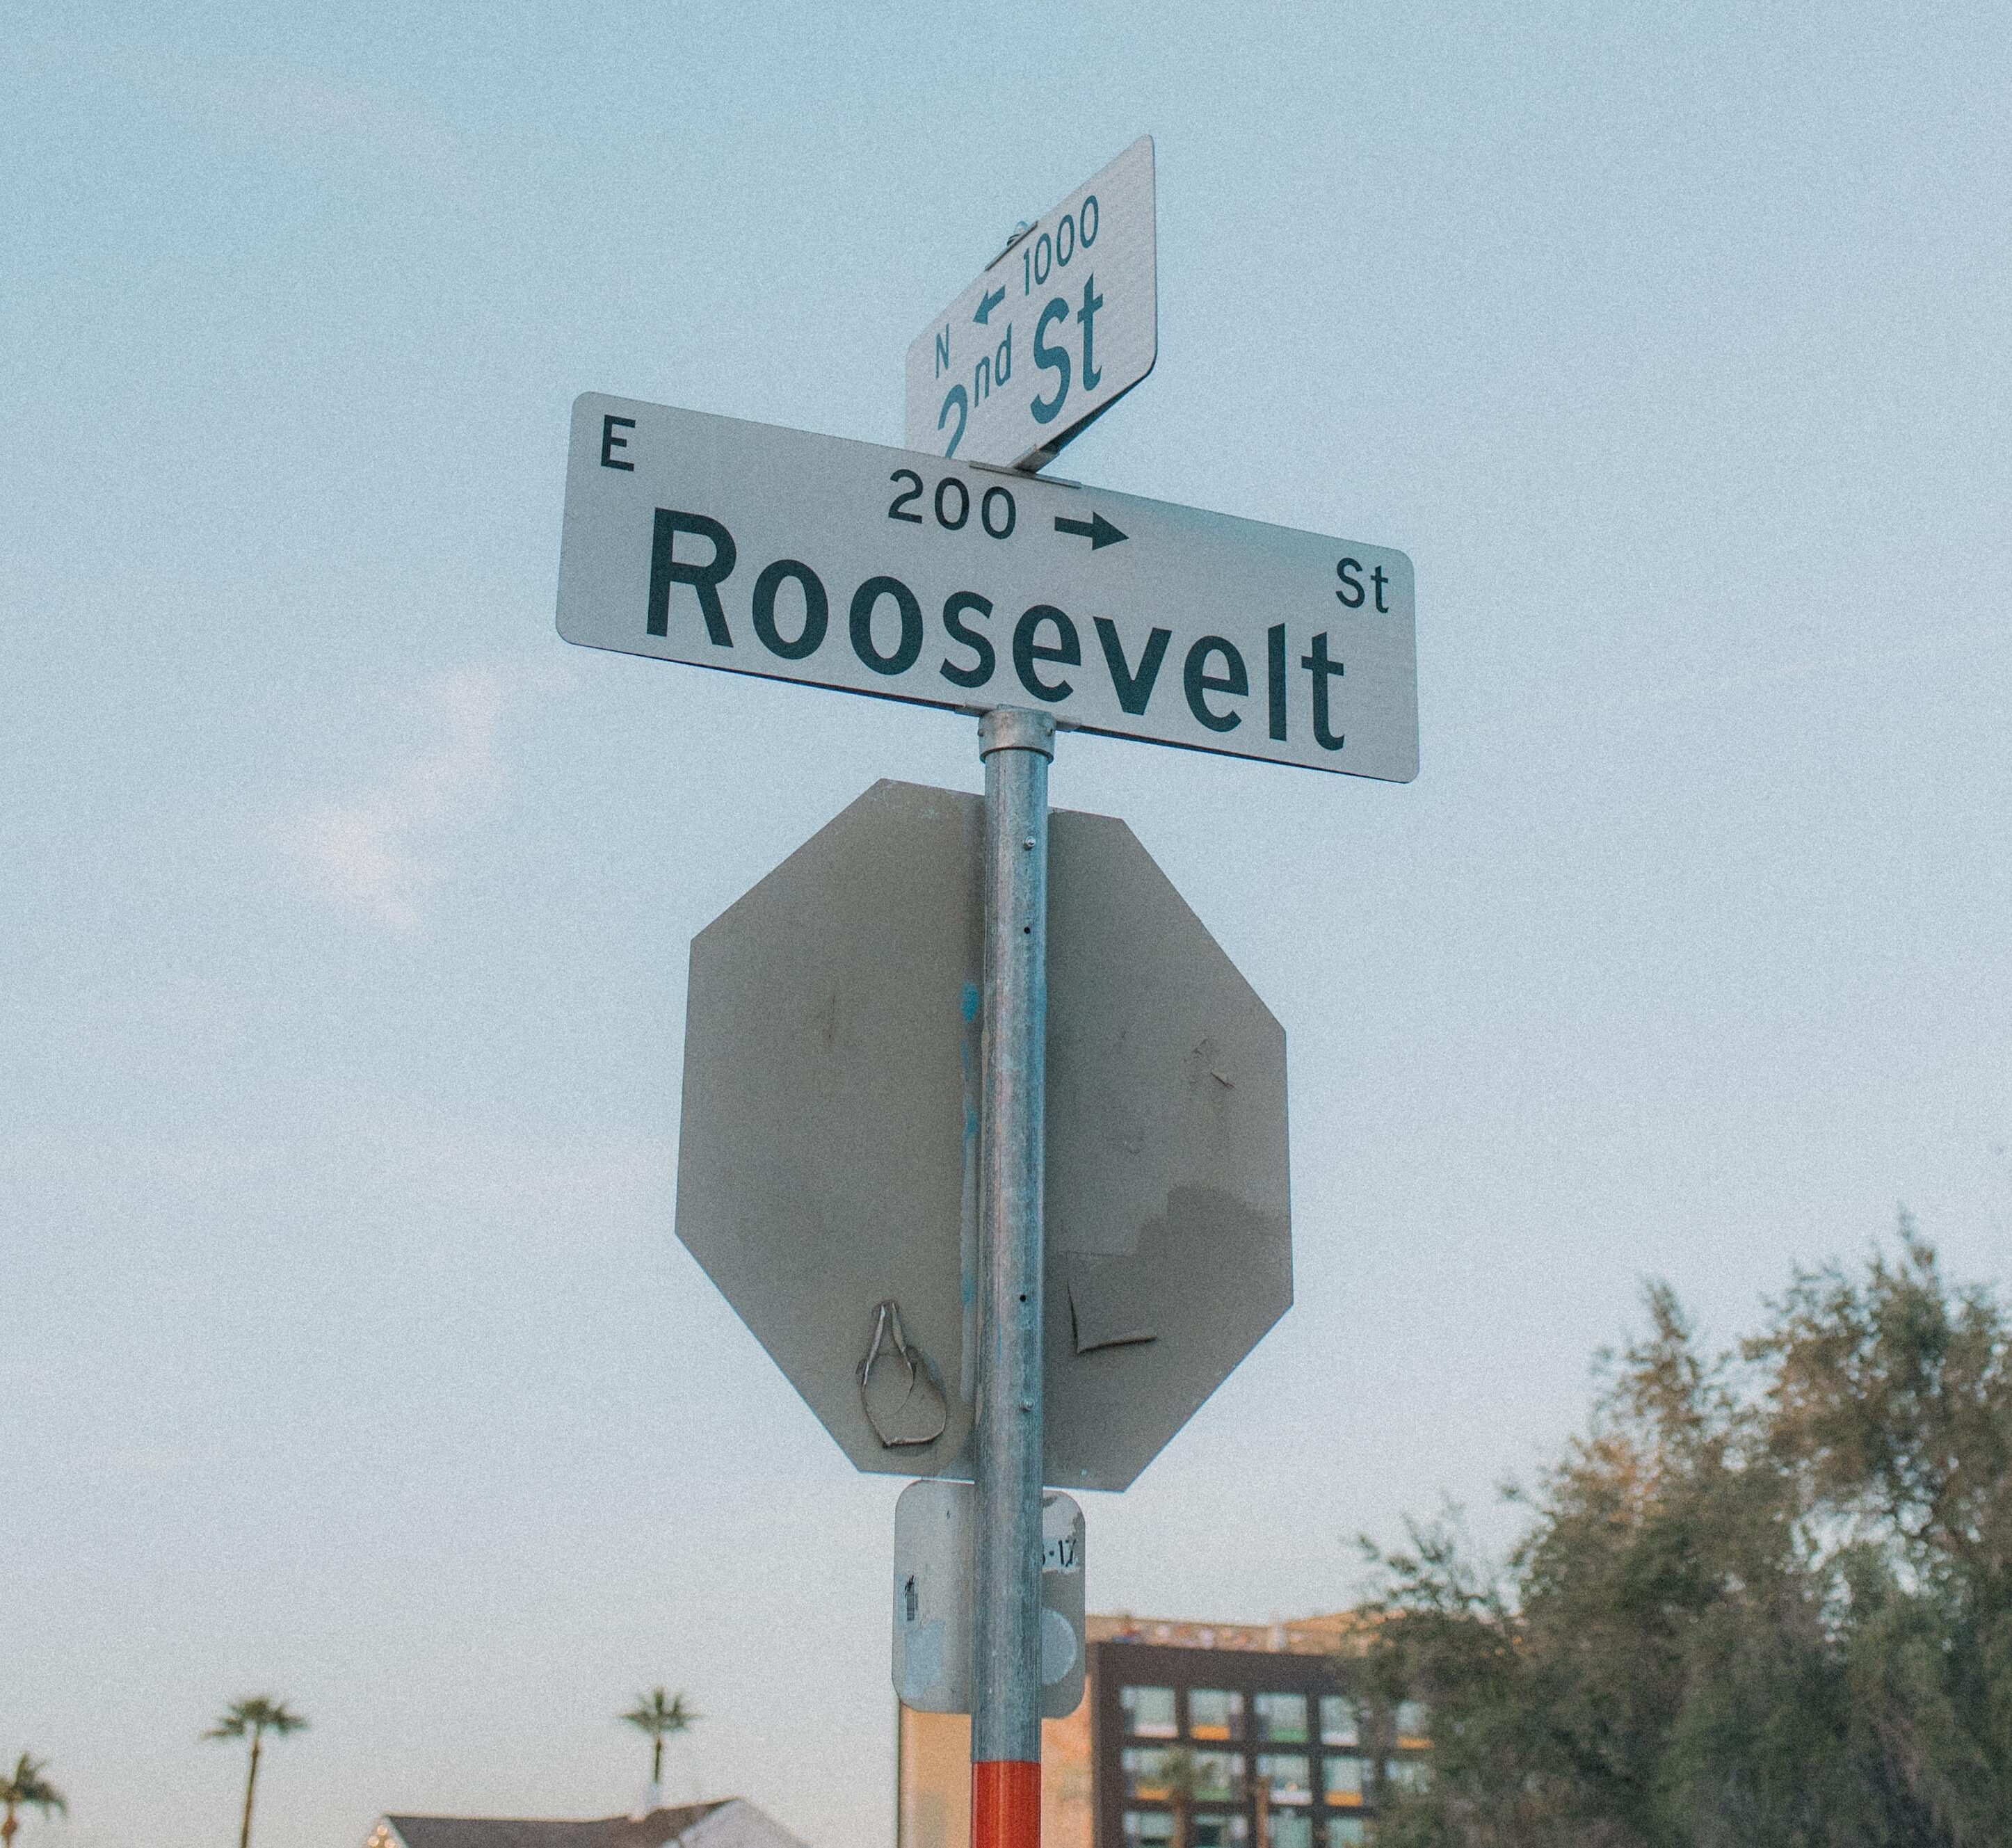 Image of Roosevelt Row street sign in downtown Phoenix